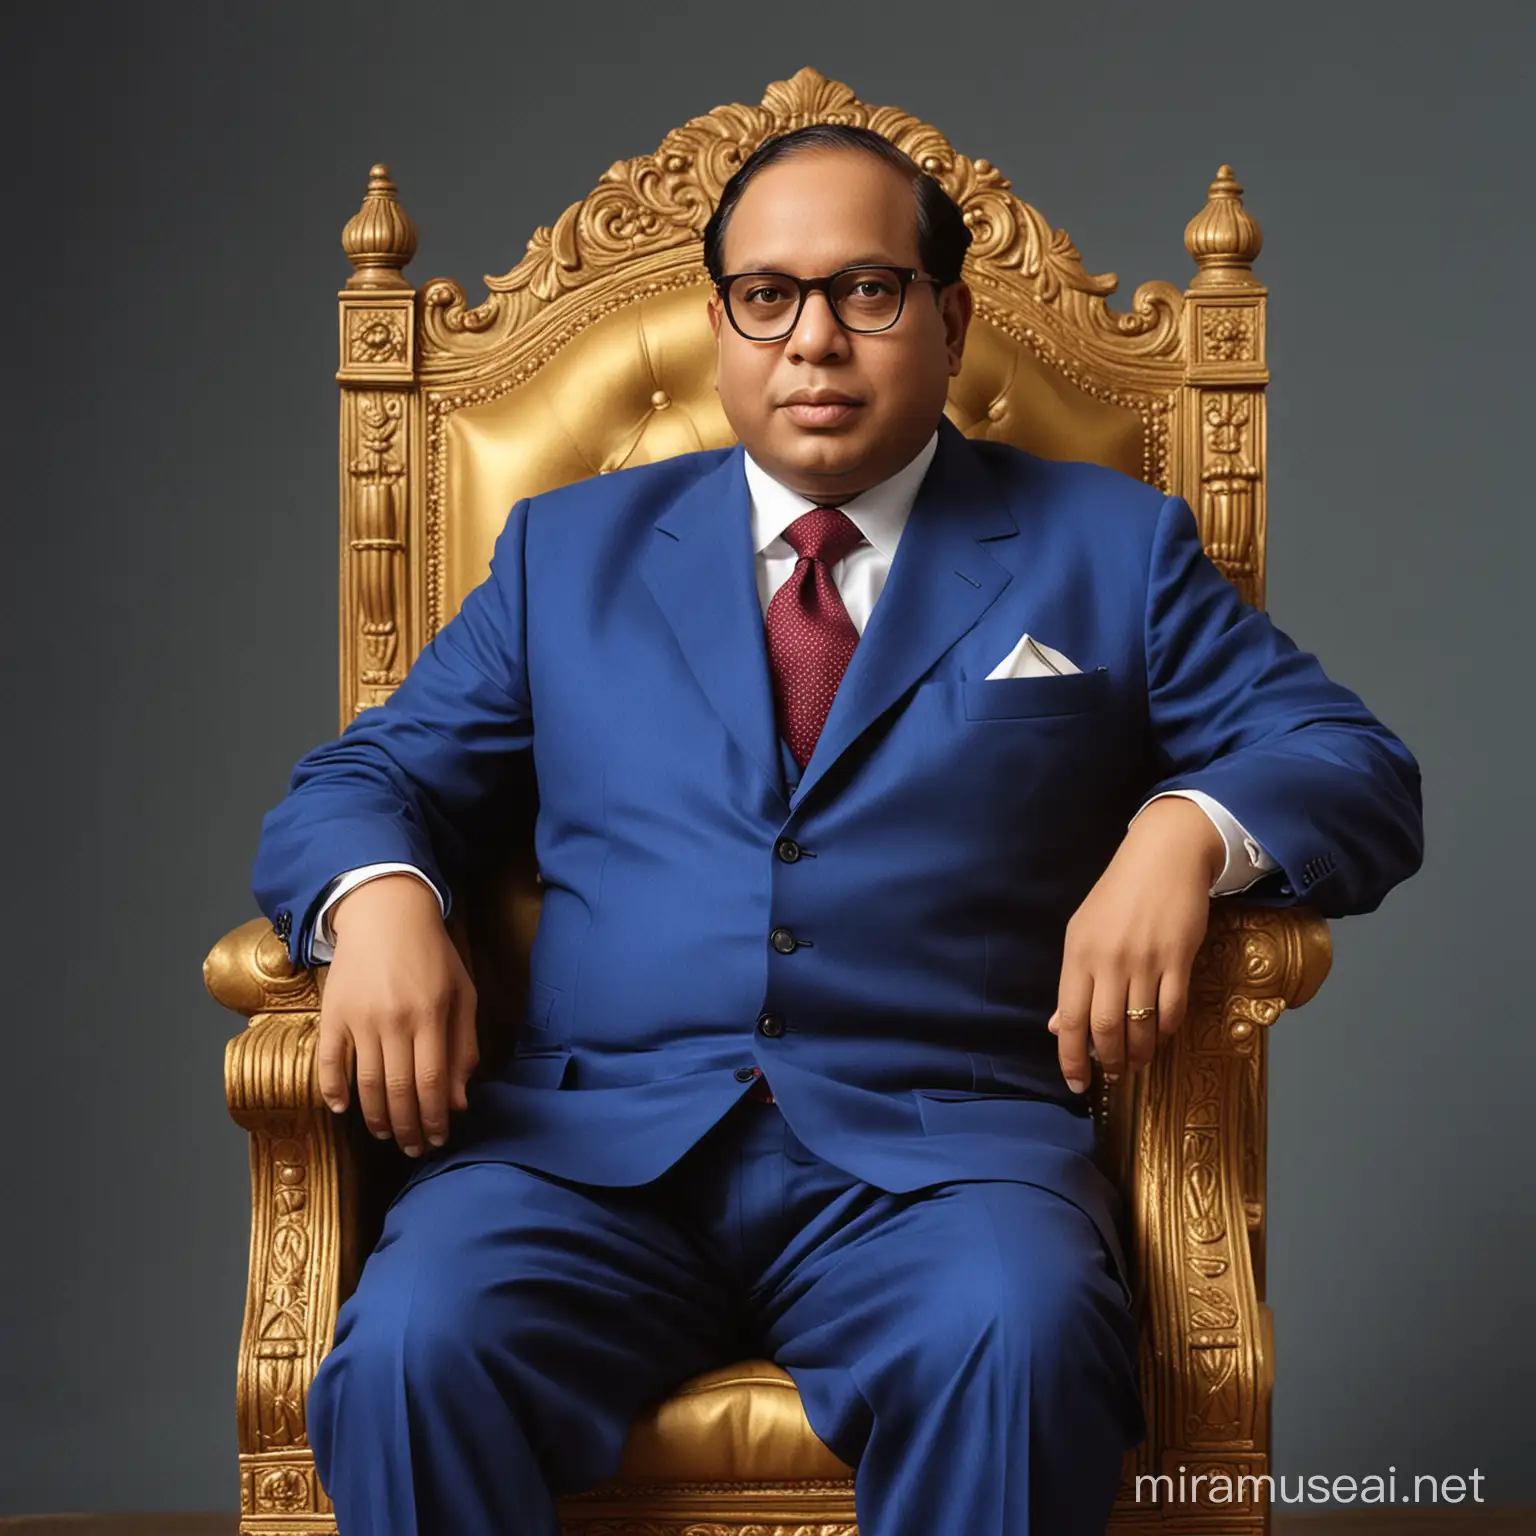 Babasaheb Ambedkar sitting on golden chair real ambedkar in blue suit front side 